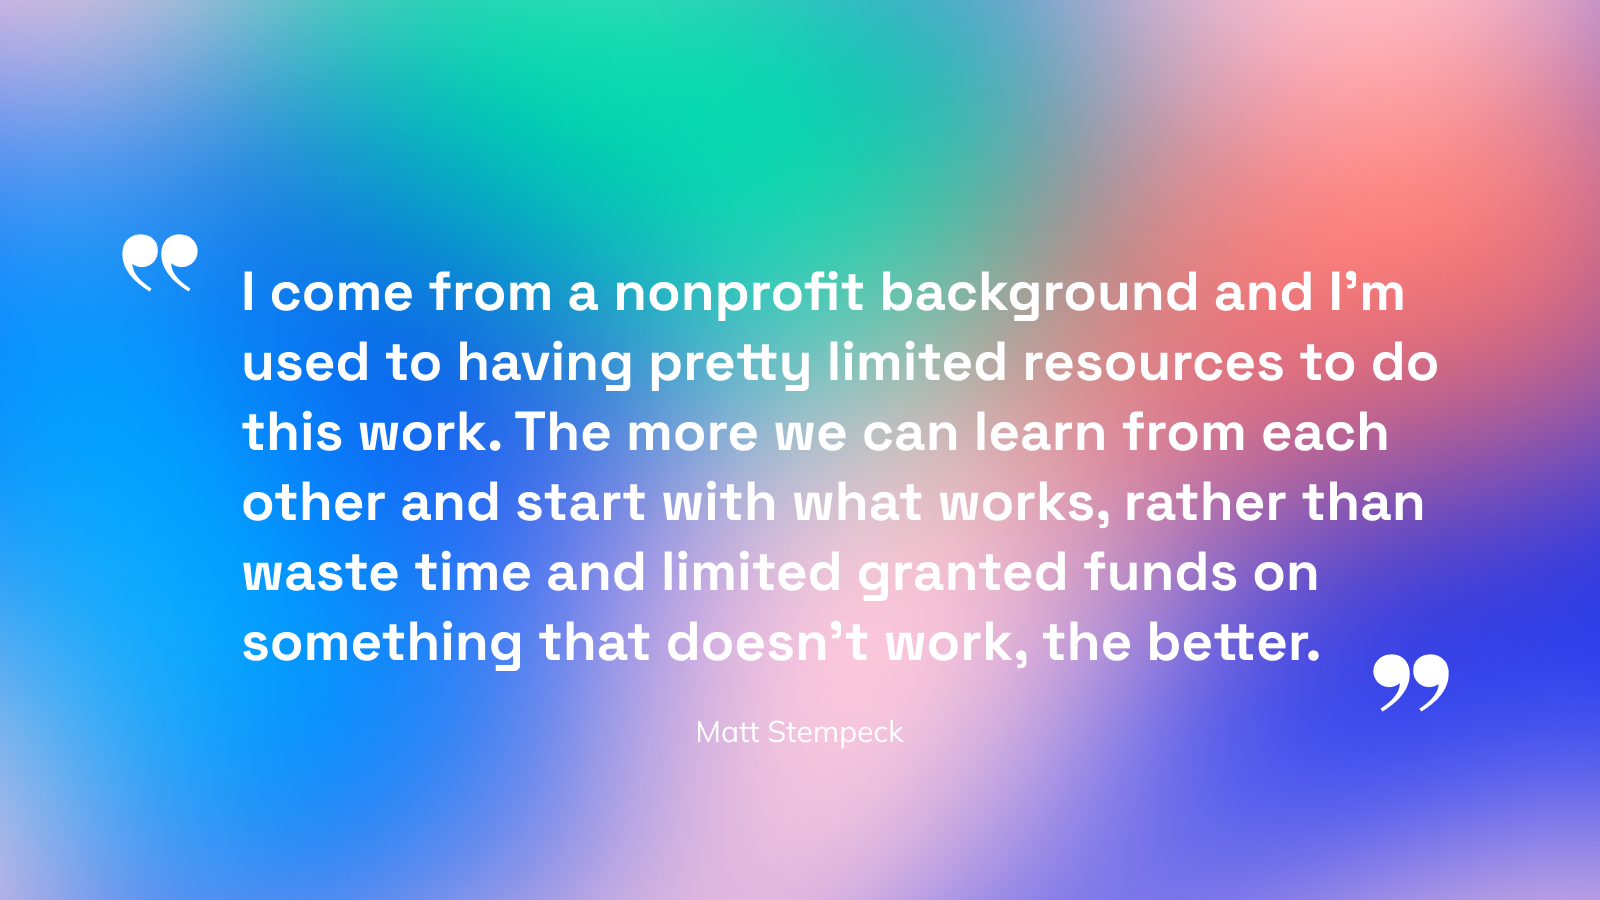 Image text: I come from a nonprofit background and I'm used to having pretty limited resources to do this work. The more we can learn from each other and start with what works, rather than waste time and limited granted funds on something that doesn't work, the better.